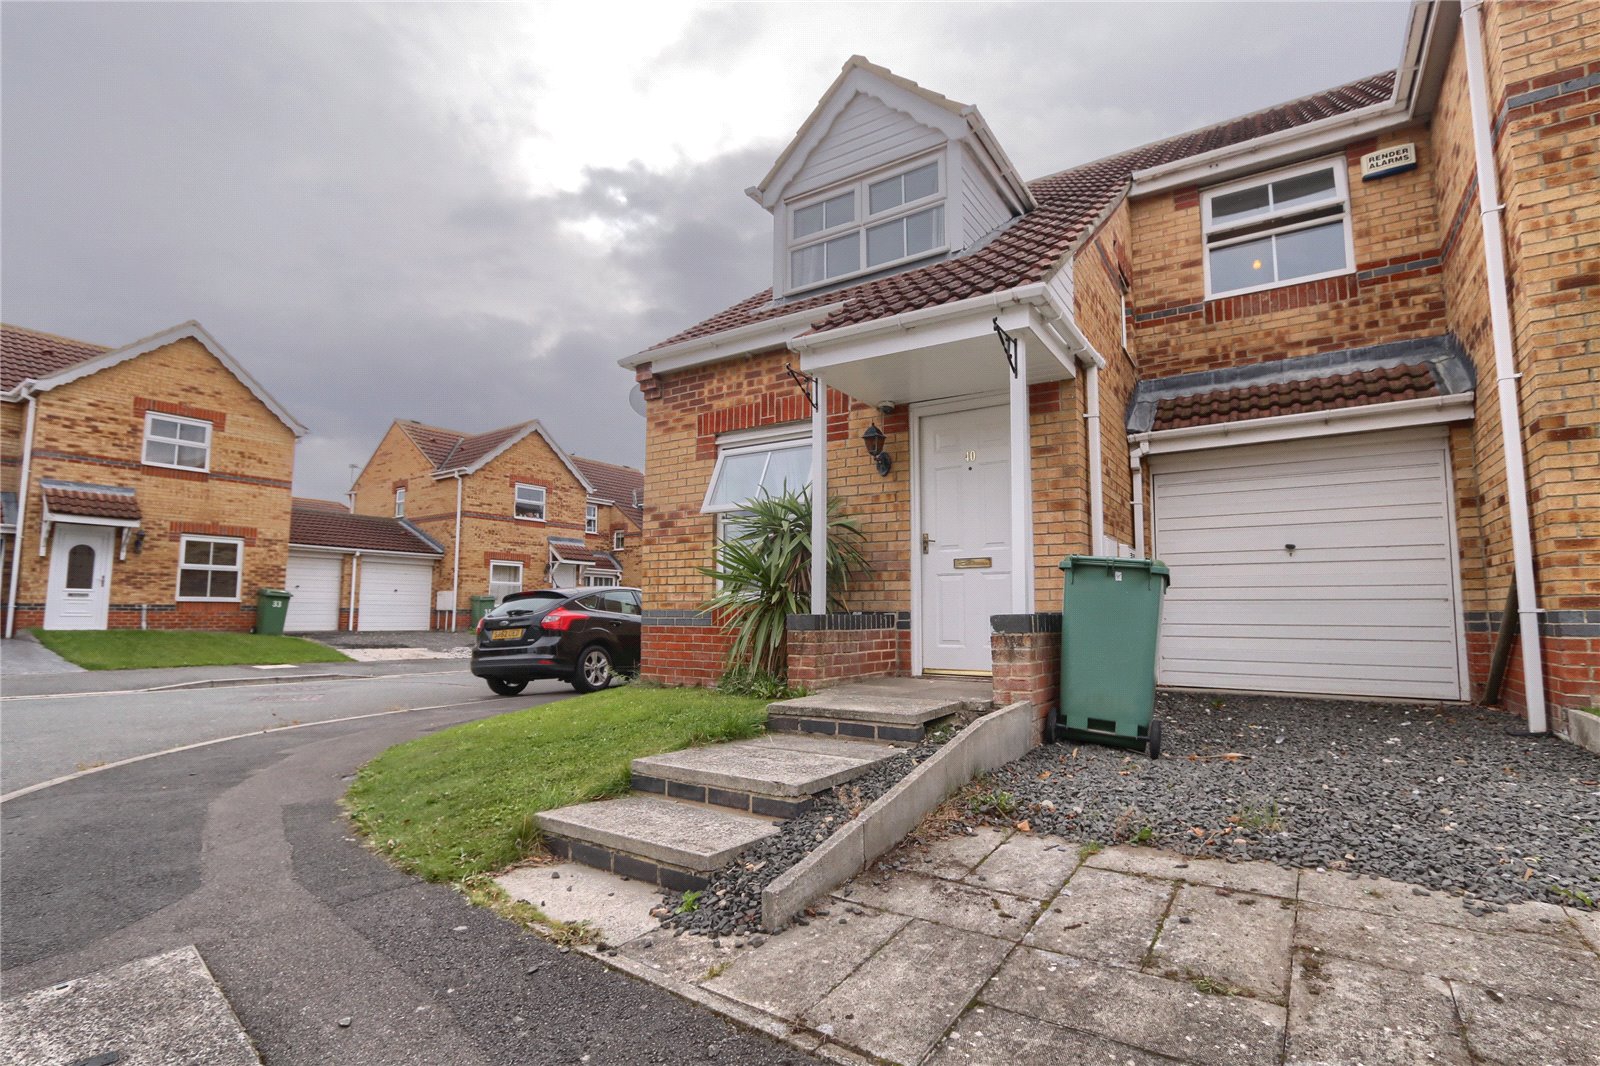 3 bed house to rent - Property Image 1